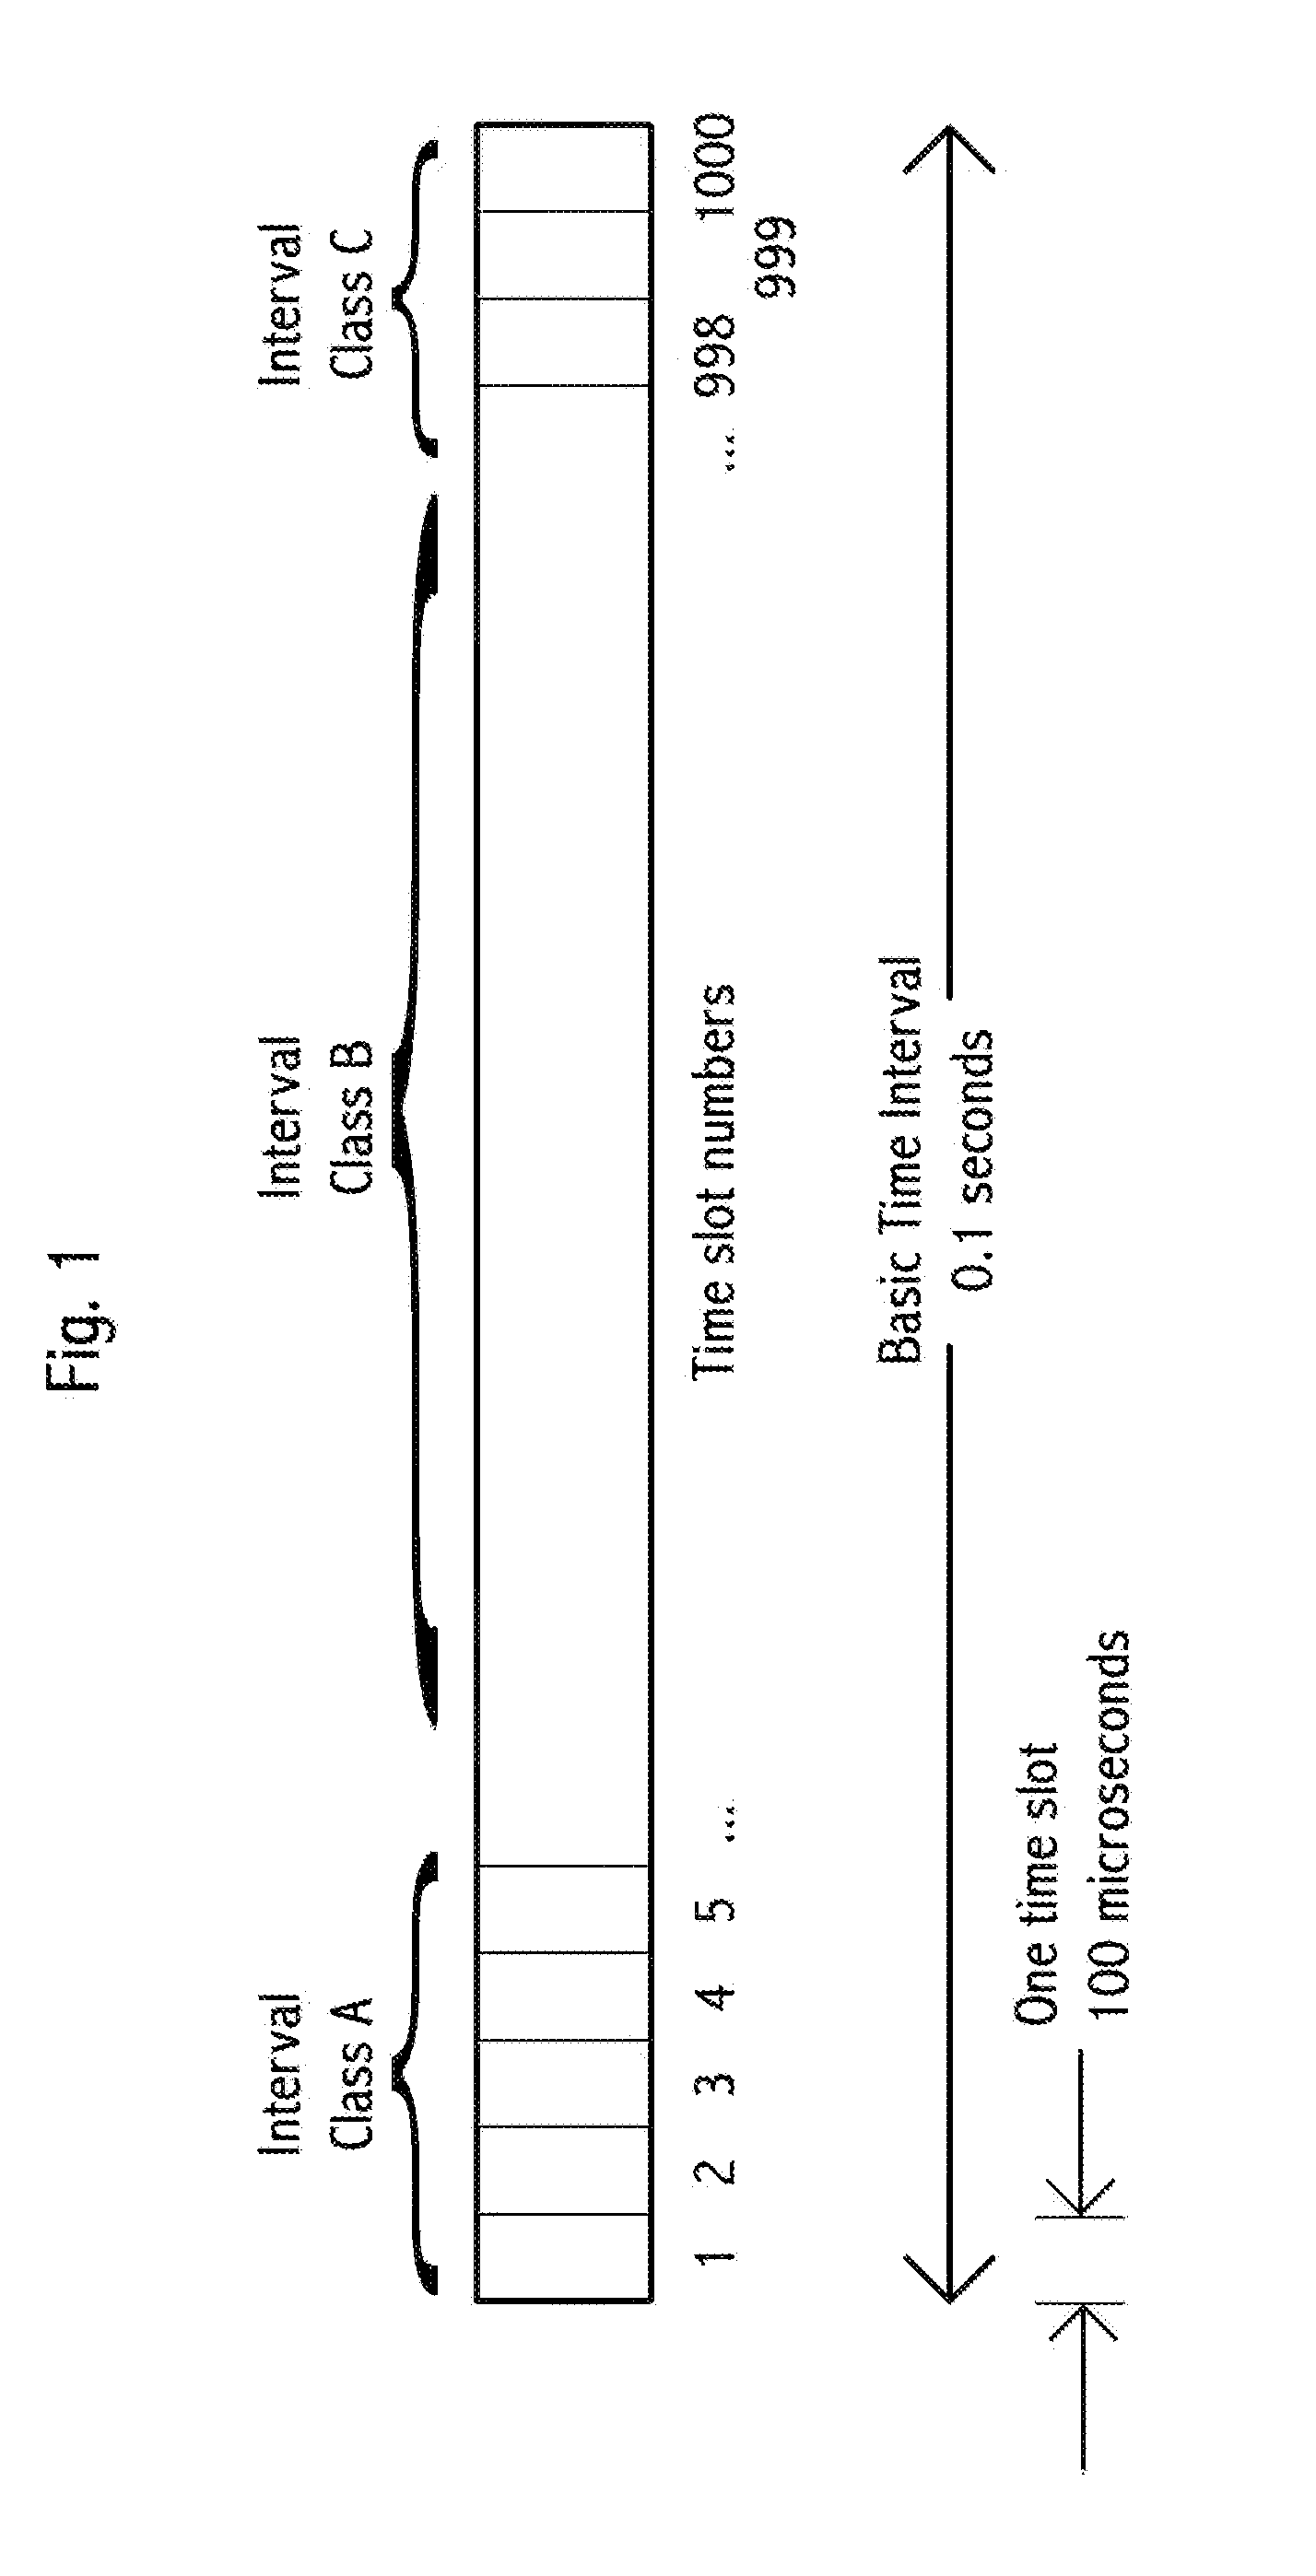 Vehicle-to-vehicle Anti-collision system and method using power levels